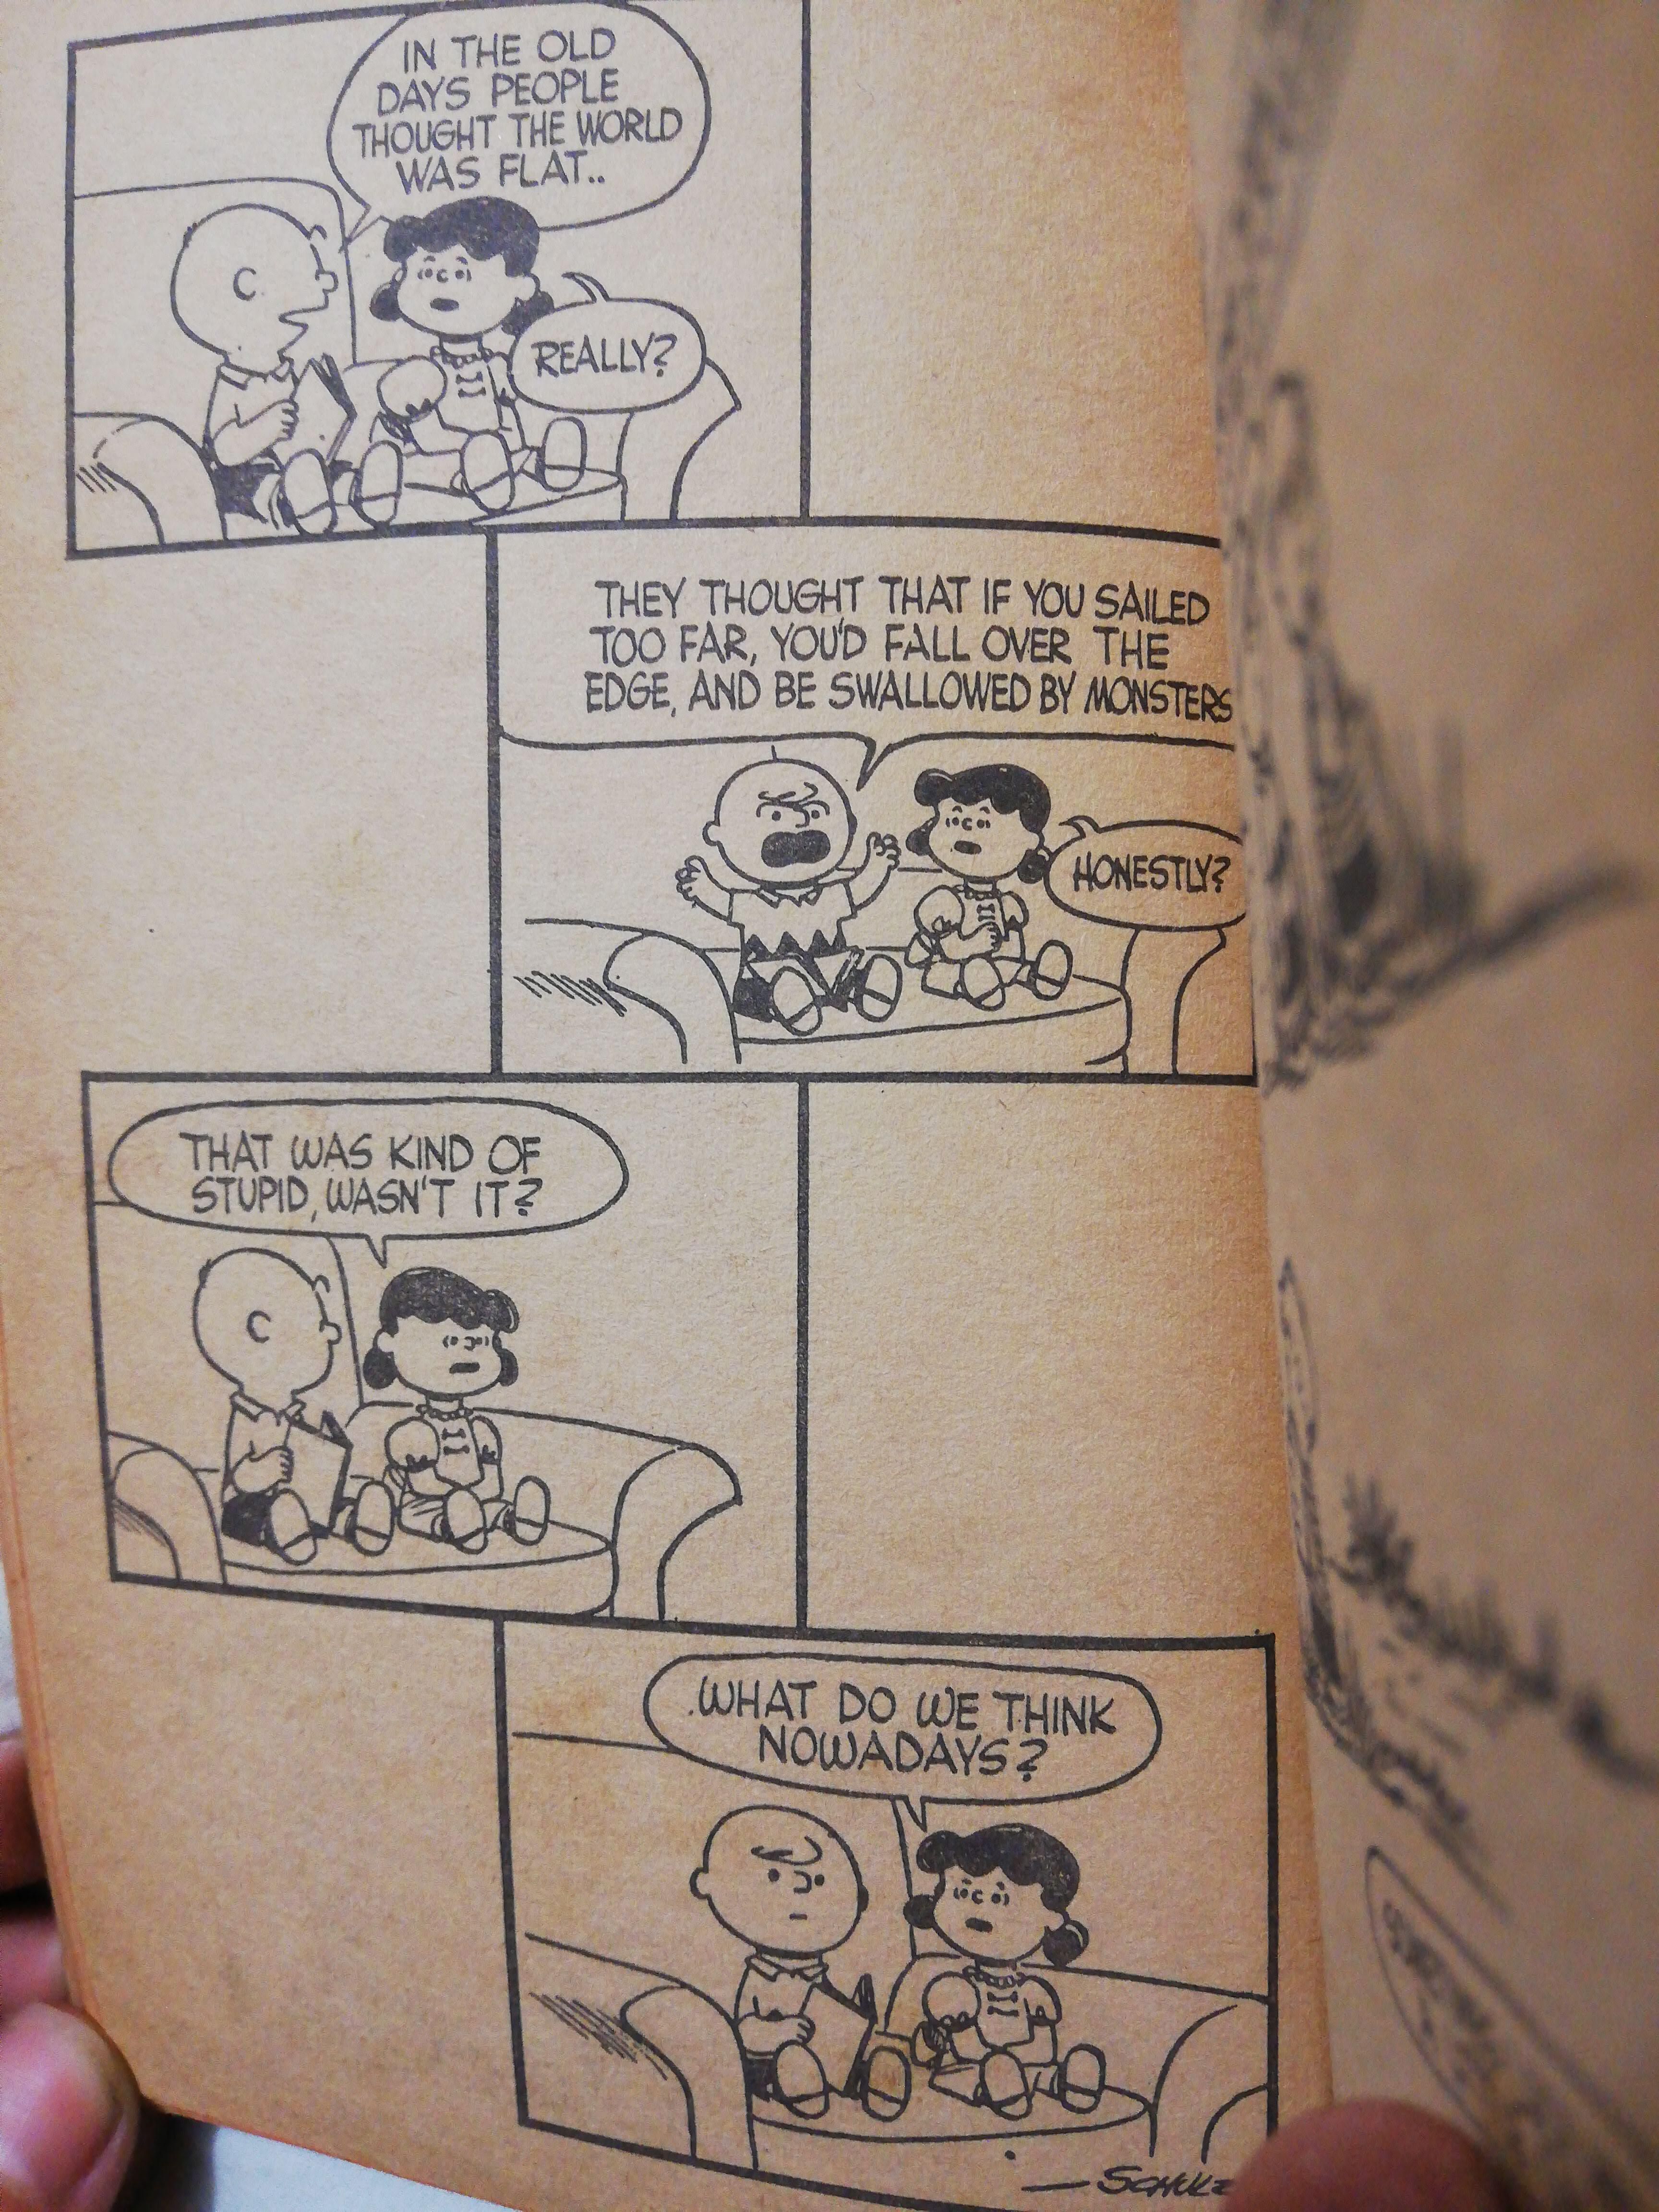 I just found this comic from 1957; I guess not much has changed.